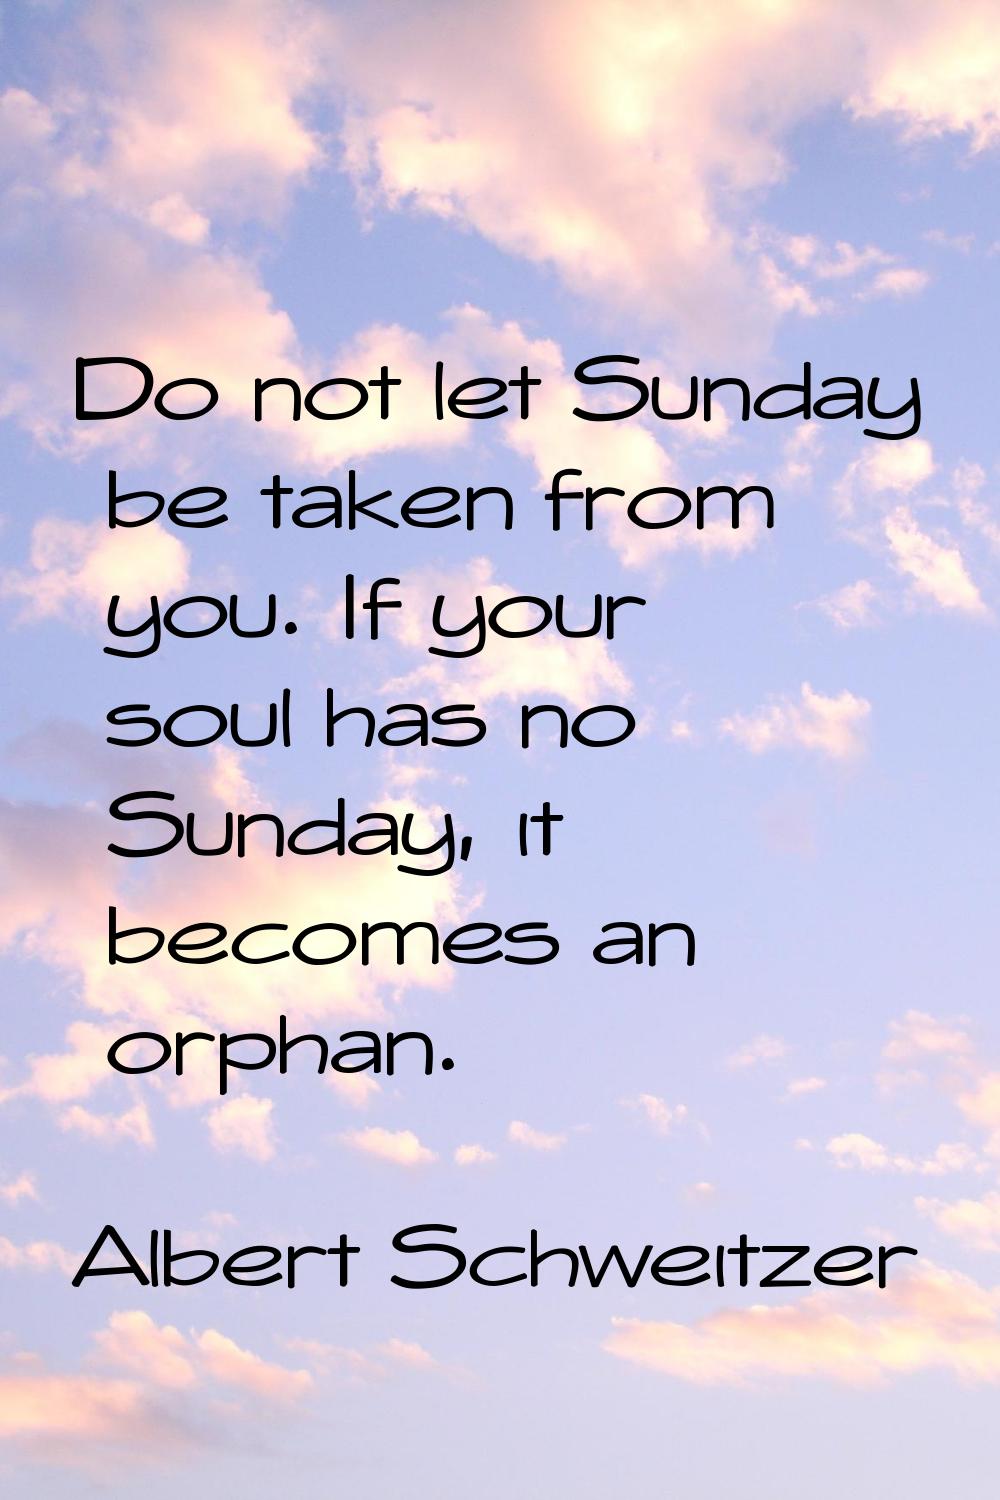 Do not let Sunday be taken from you. If your soul has no Sunday, it becomes an orphan.